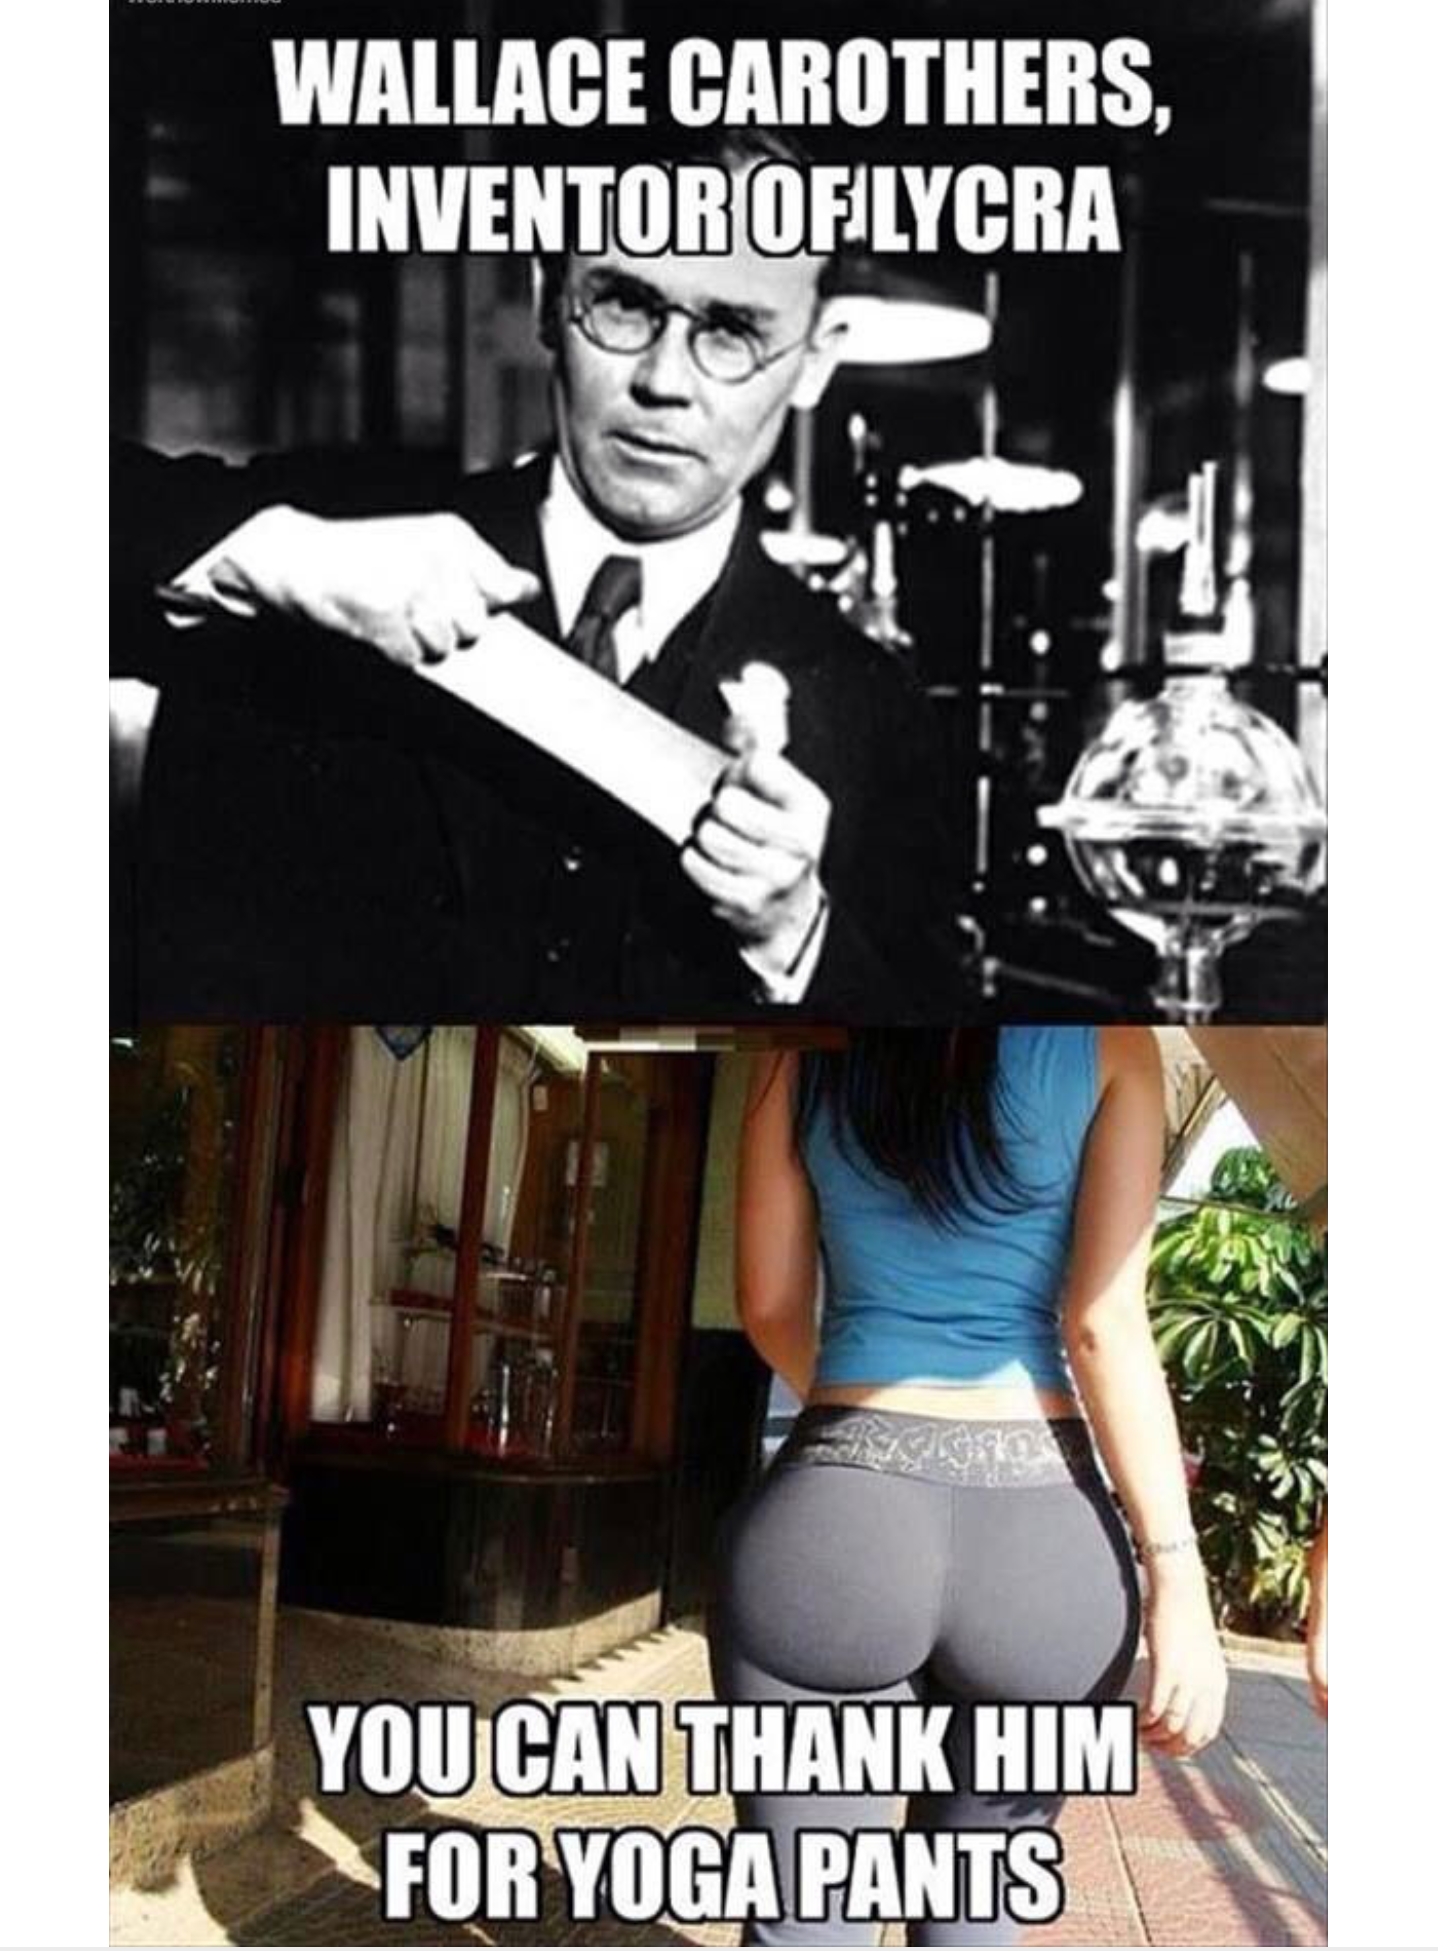 inventor of yoga pants - Wallace Carothers, Inventor Of Lycra You Can Thank Him For Yoga Pants